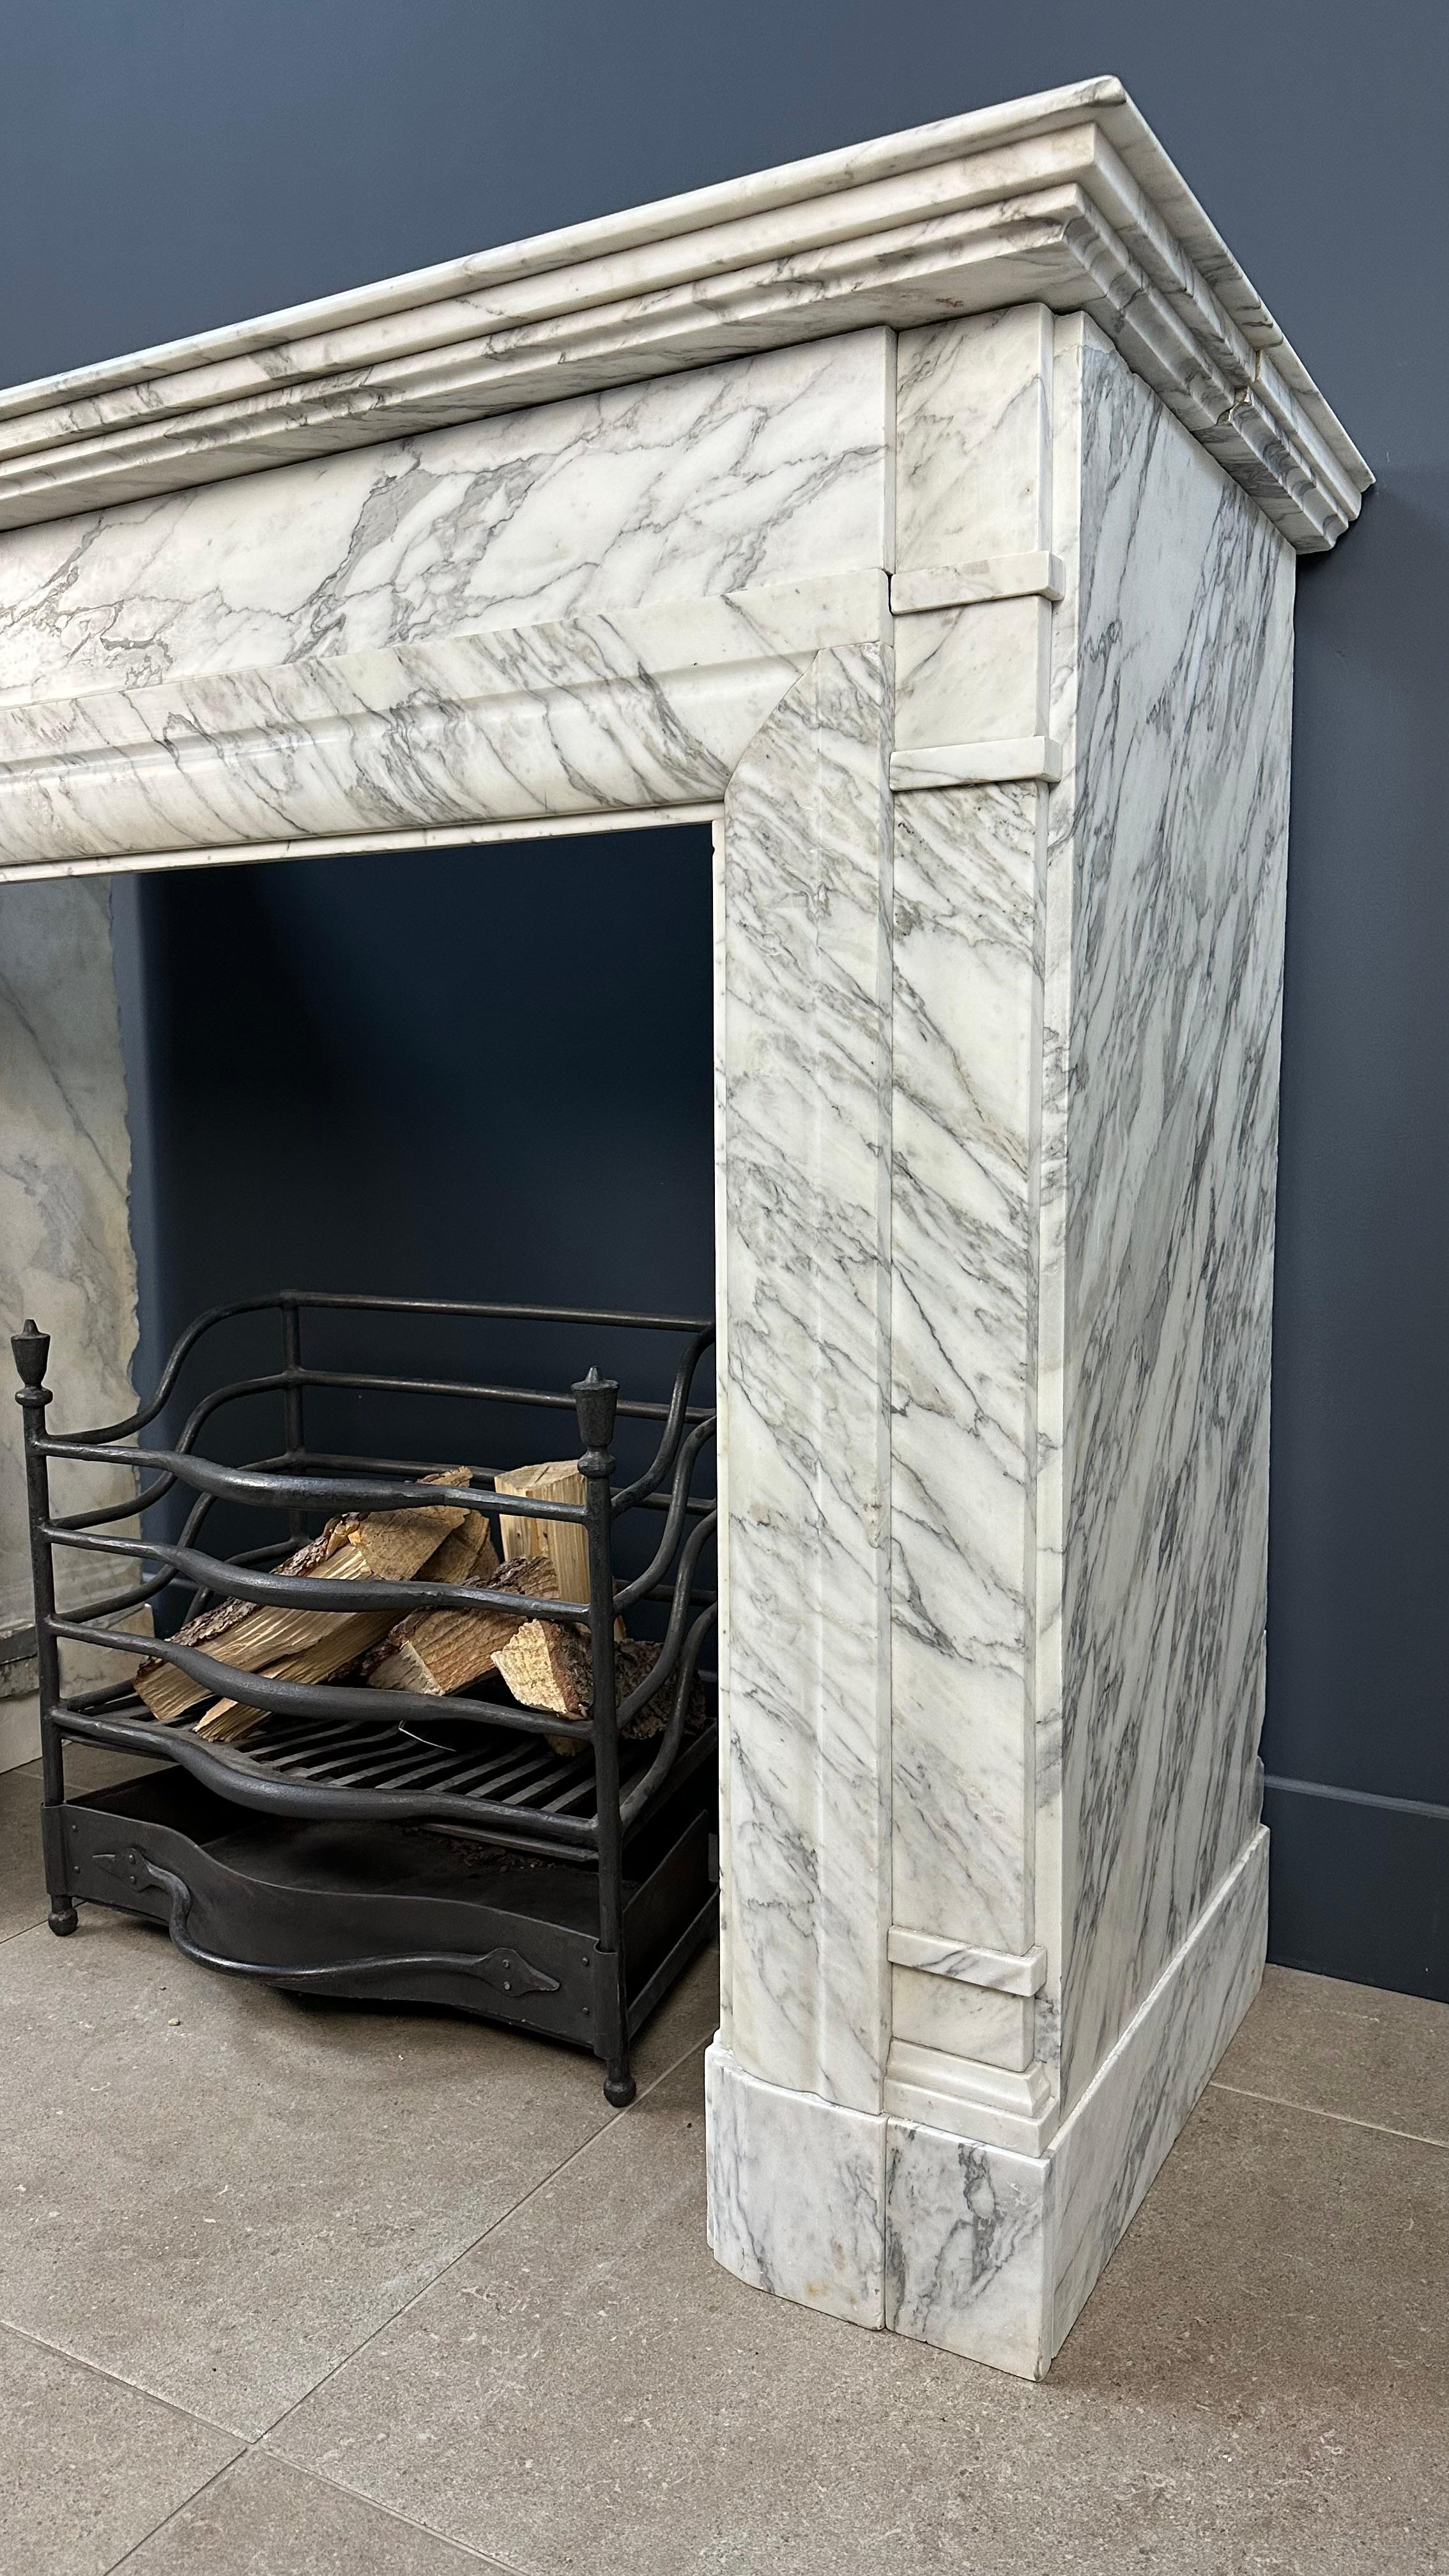 Behold, an Antique Art Deco Fireplace, resplendent in its exquisite veined white marble. This timeless masterpiece traces its origins to a magnificent mansion nestled in the heart of Amsterdam, just behind the municipal museum, where it once graced